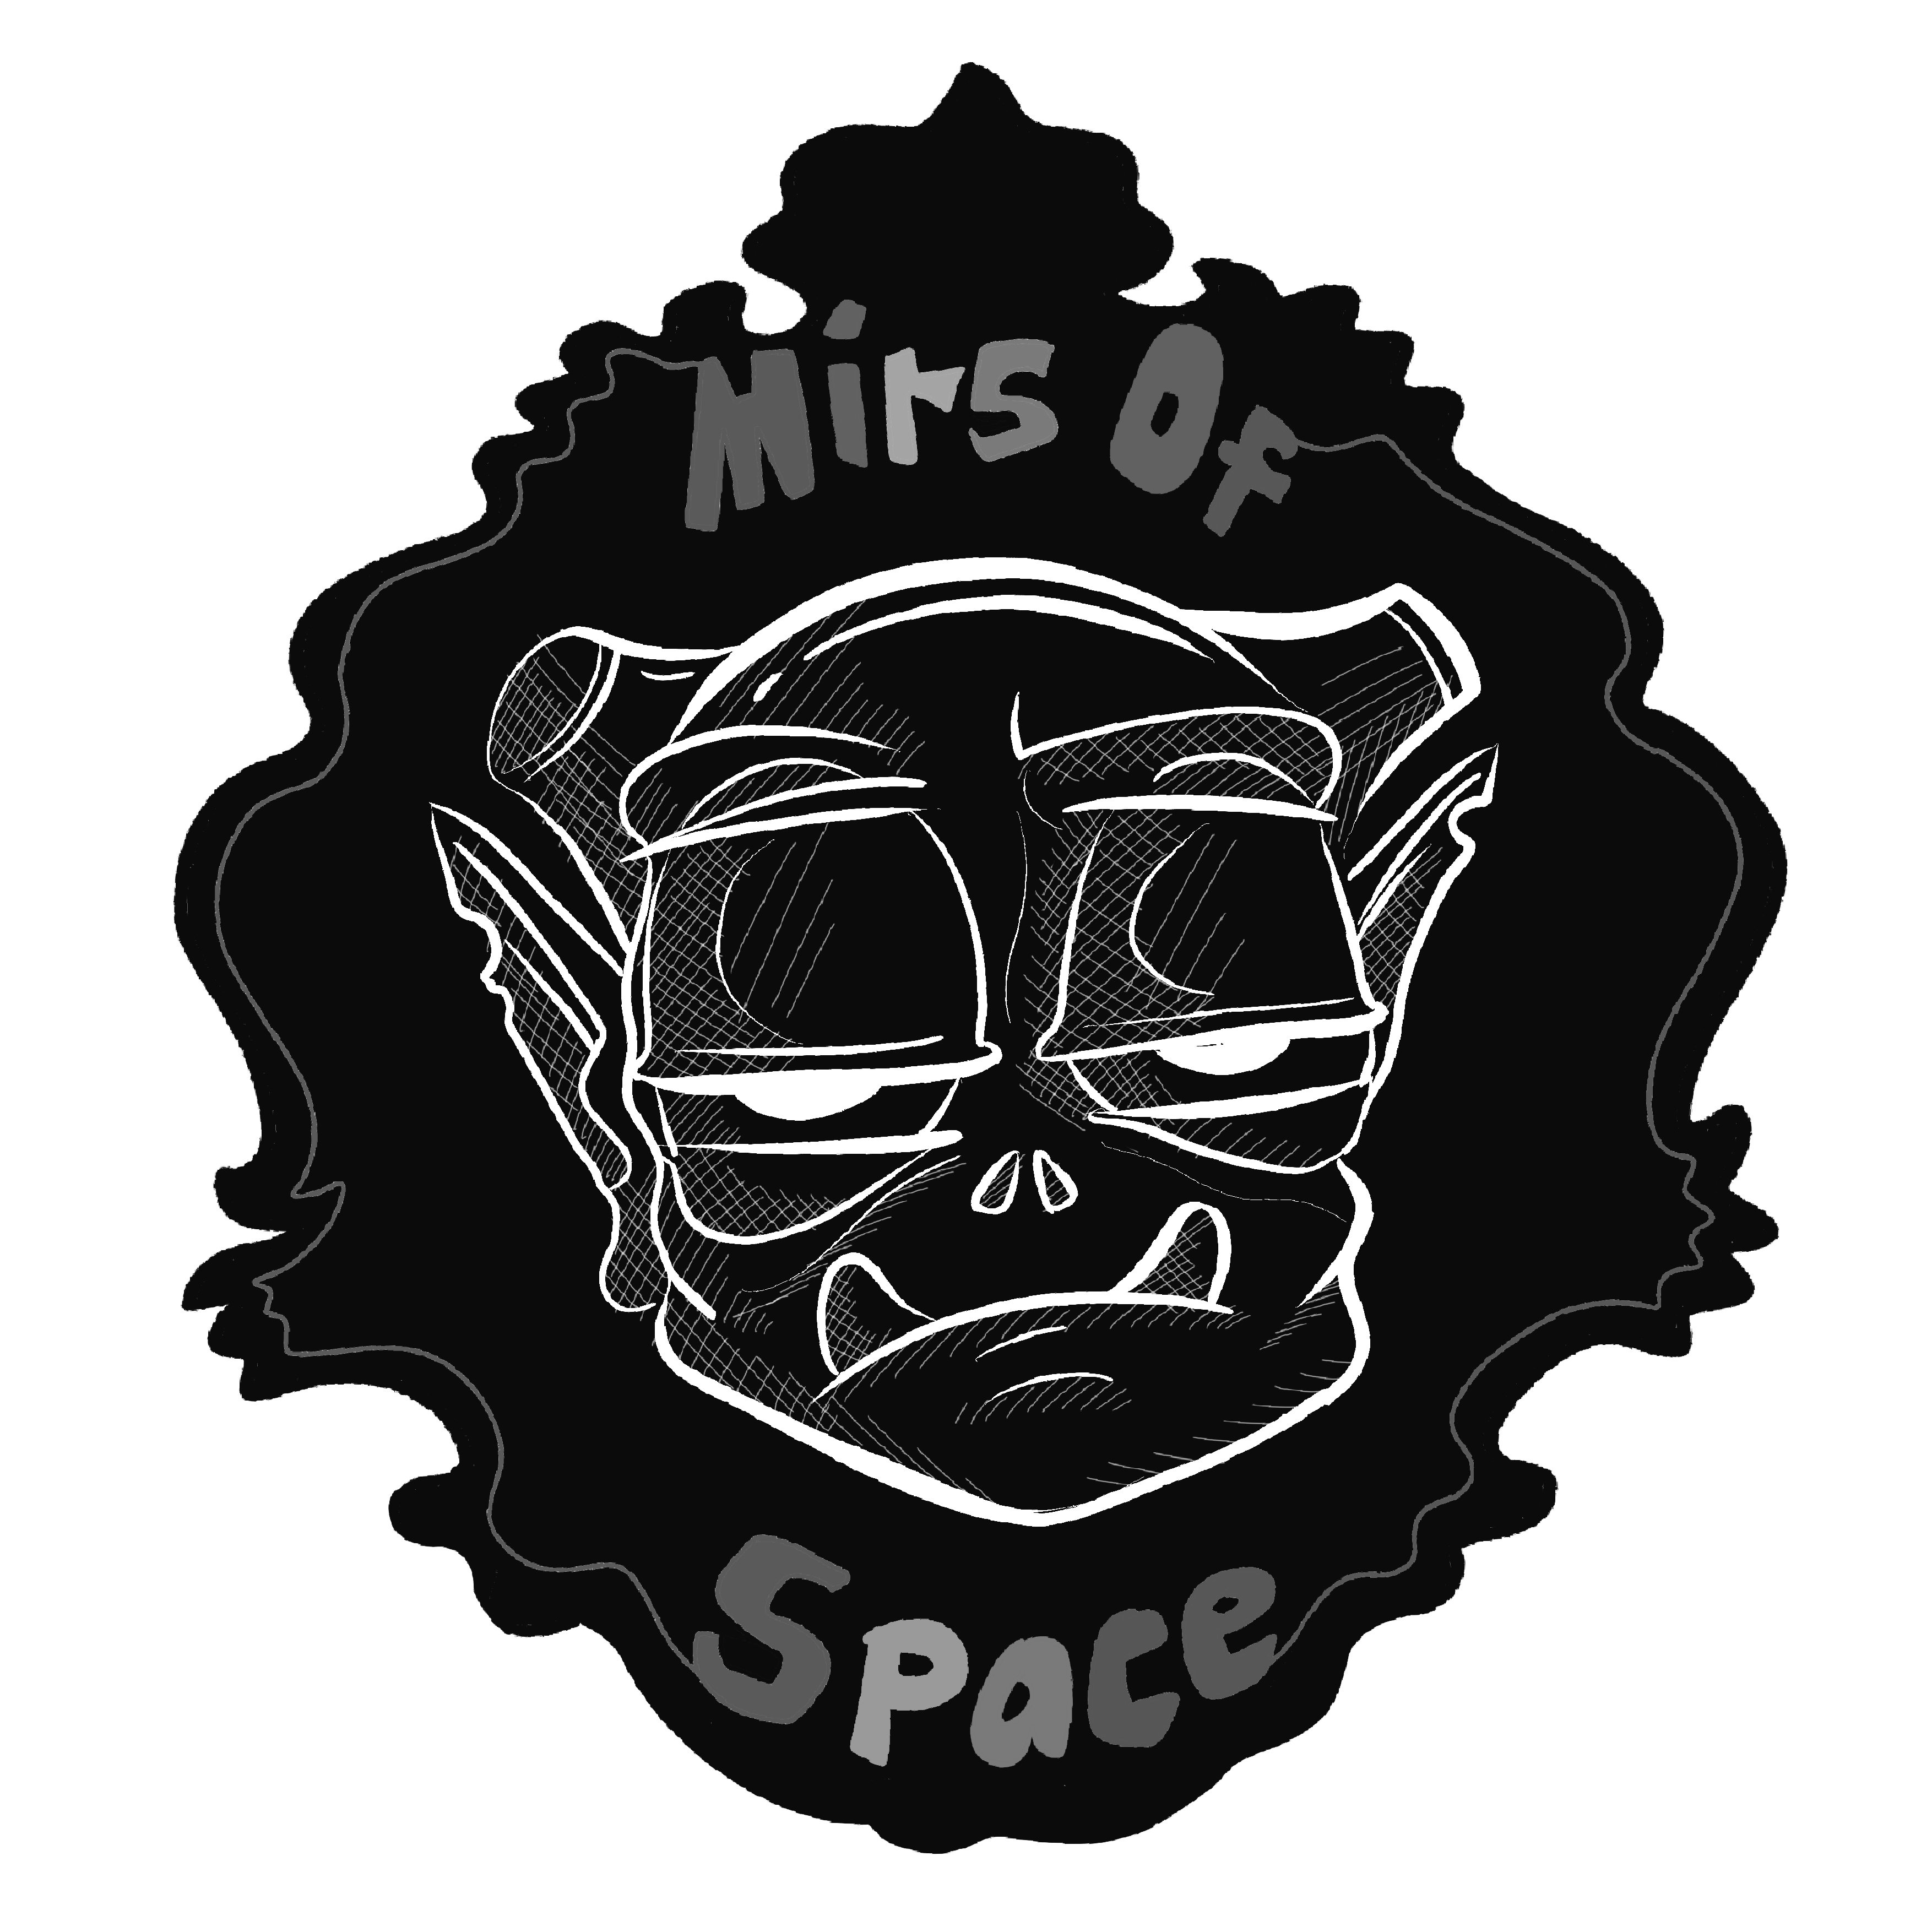 Mirs of Space NFT